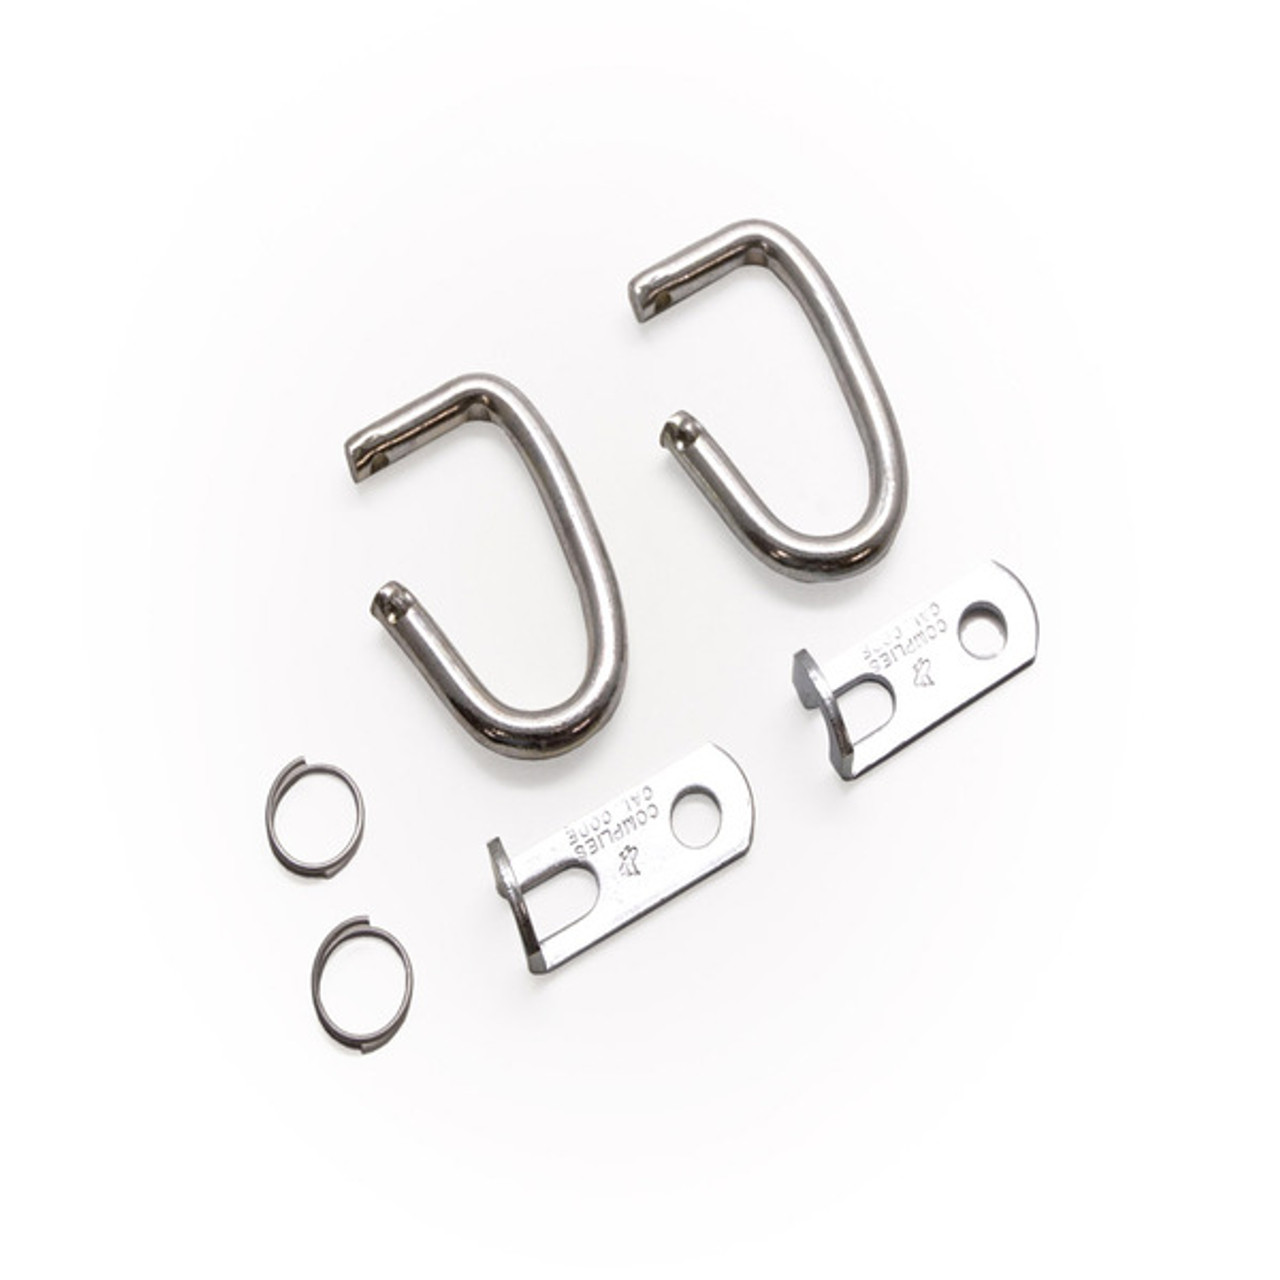 Replacement C-Hook for Single Spring One-Piece Doors